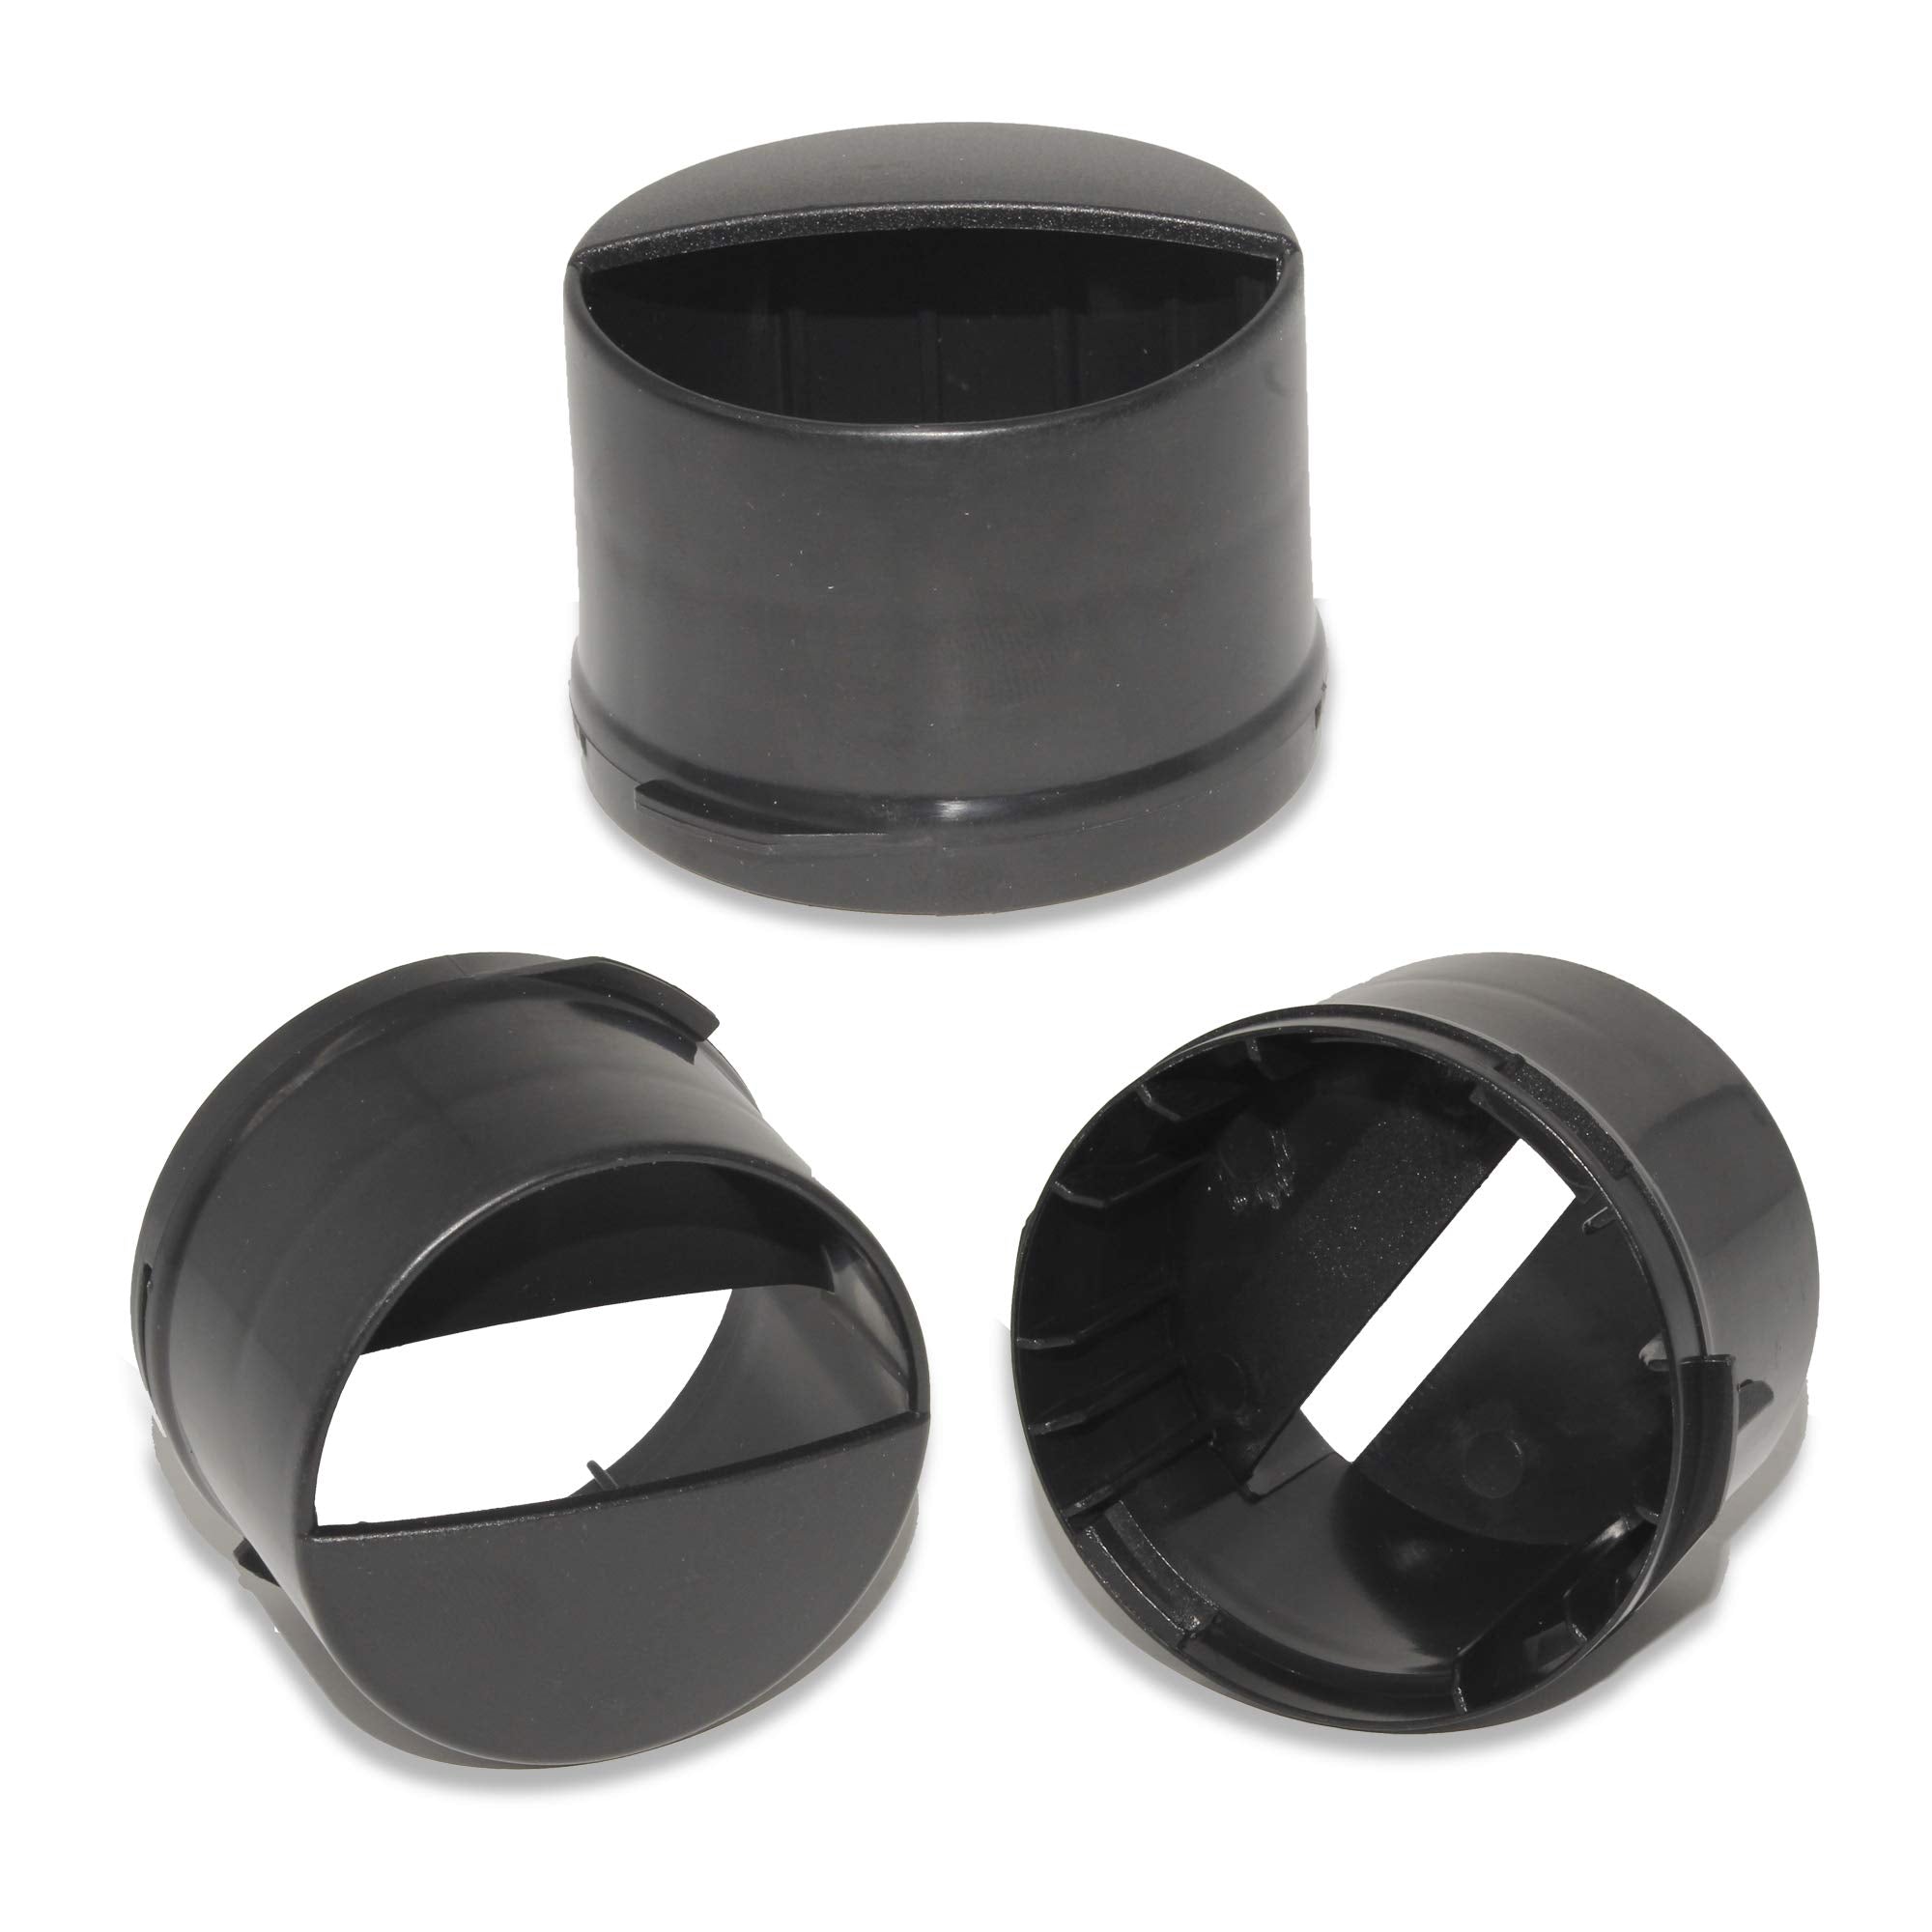 Appliance Pros Replacement 2260518B Water Filter Cap (AP-2260518W Filter Cap, 1-Pack (Matte Black)) - Appliance Pros